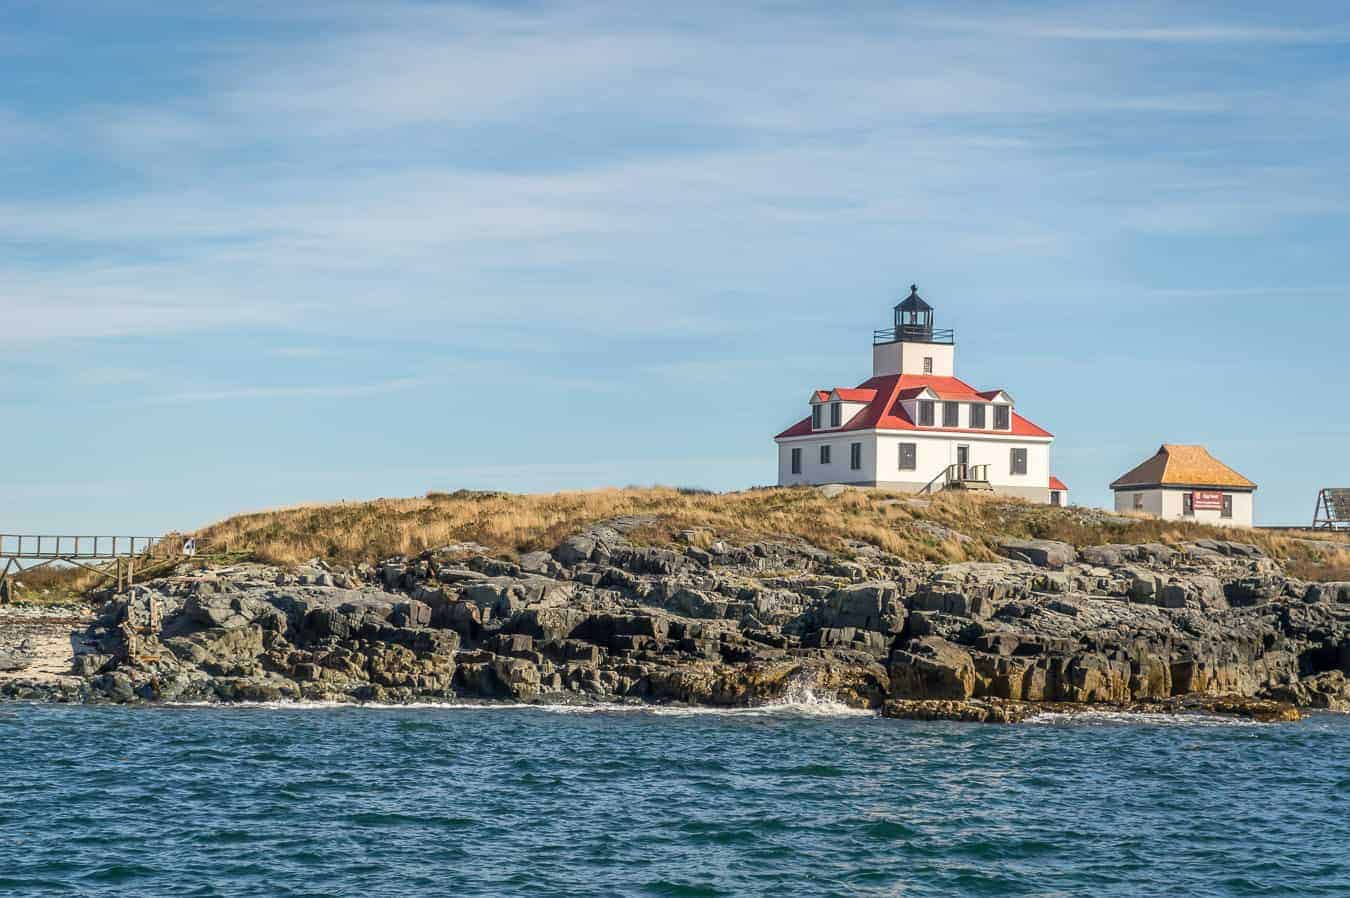 where to stay in acadia national park and bar harbor - image of square lighthouse on rocky ledge